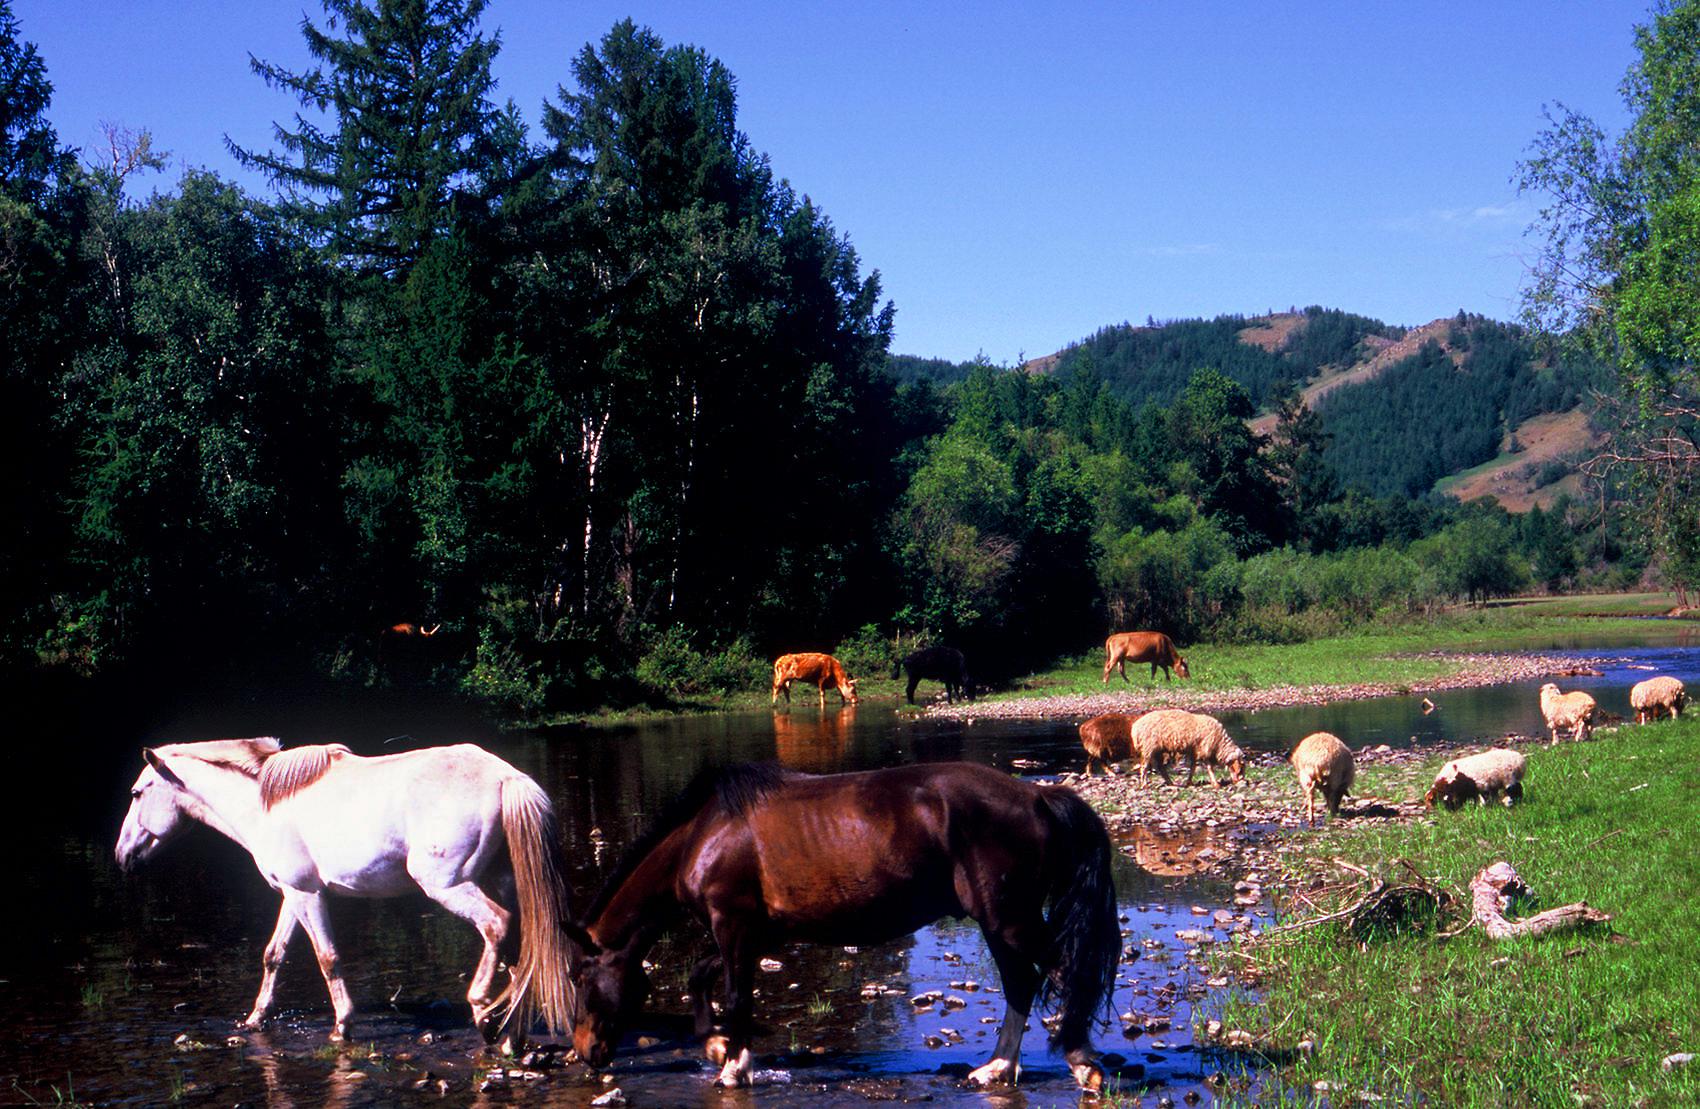 Horses drink water and eat grass. That's ecologically-sound transport.